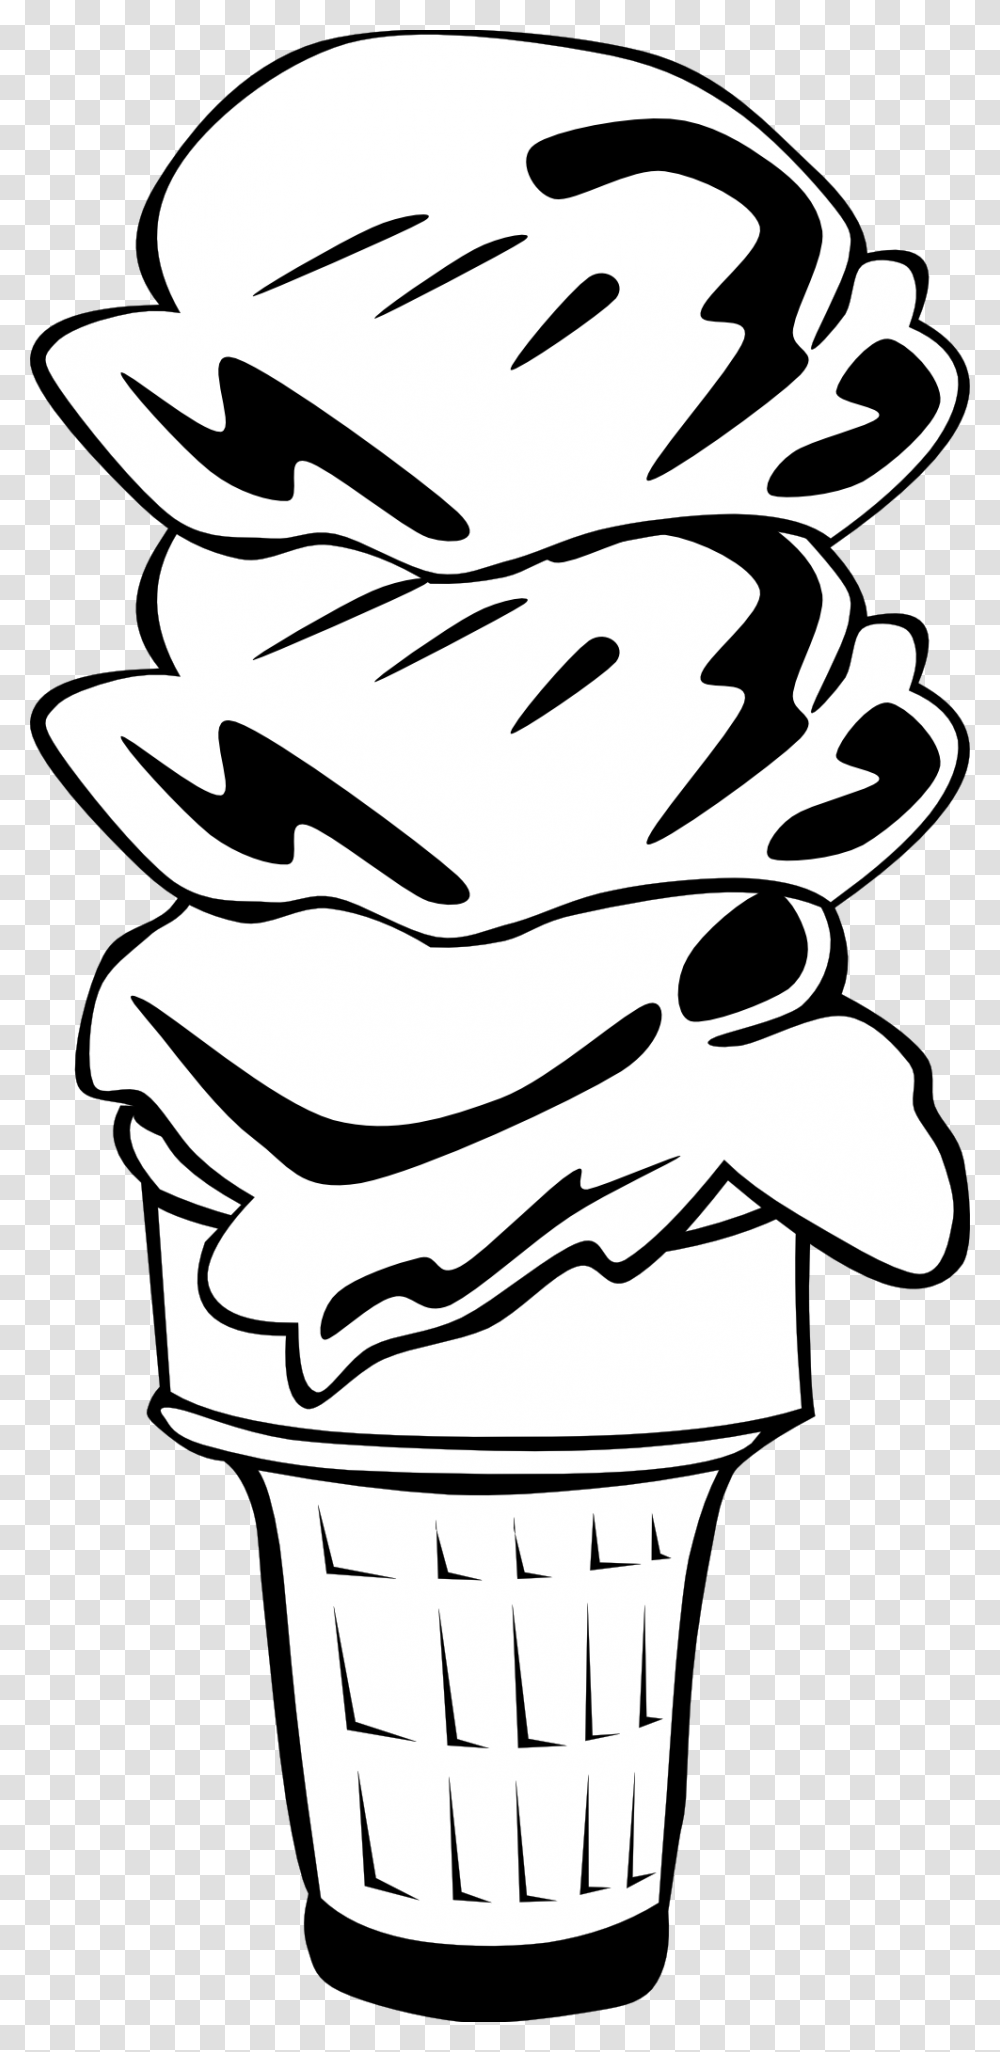 Black And White Ice Cream Cone Clipart Ice Cream Clipart Black And White, Stencil, Plant, Produce, Food Transparent Png